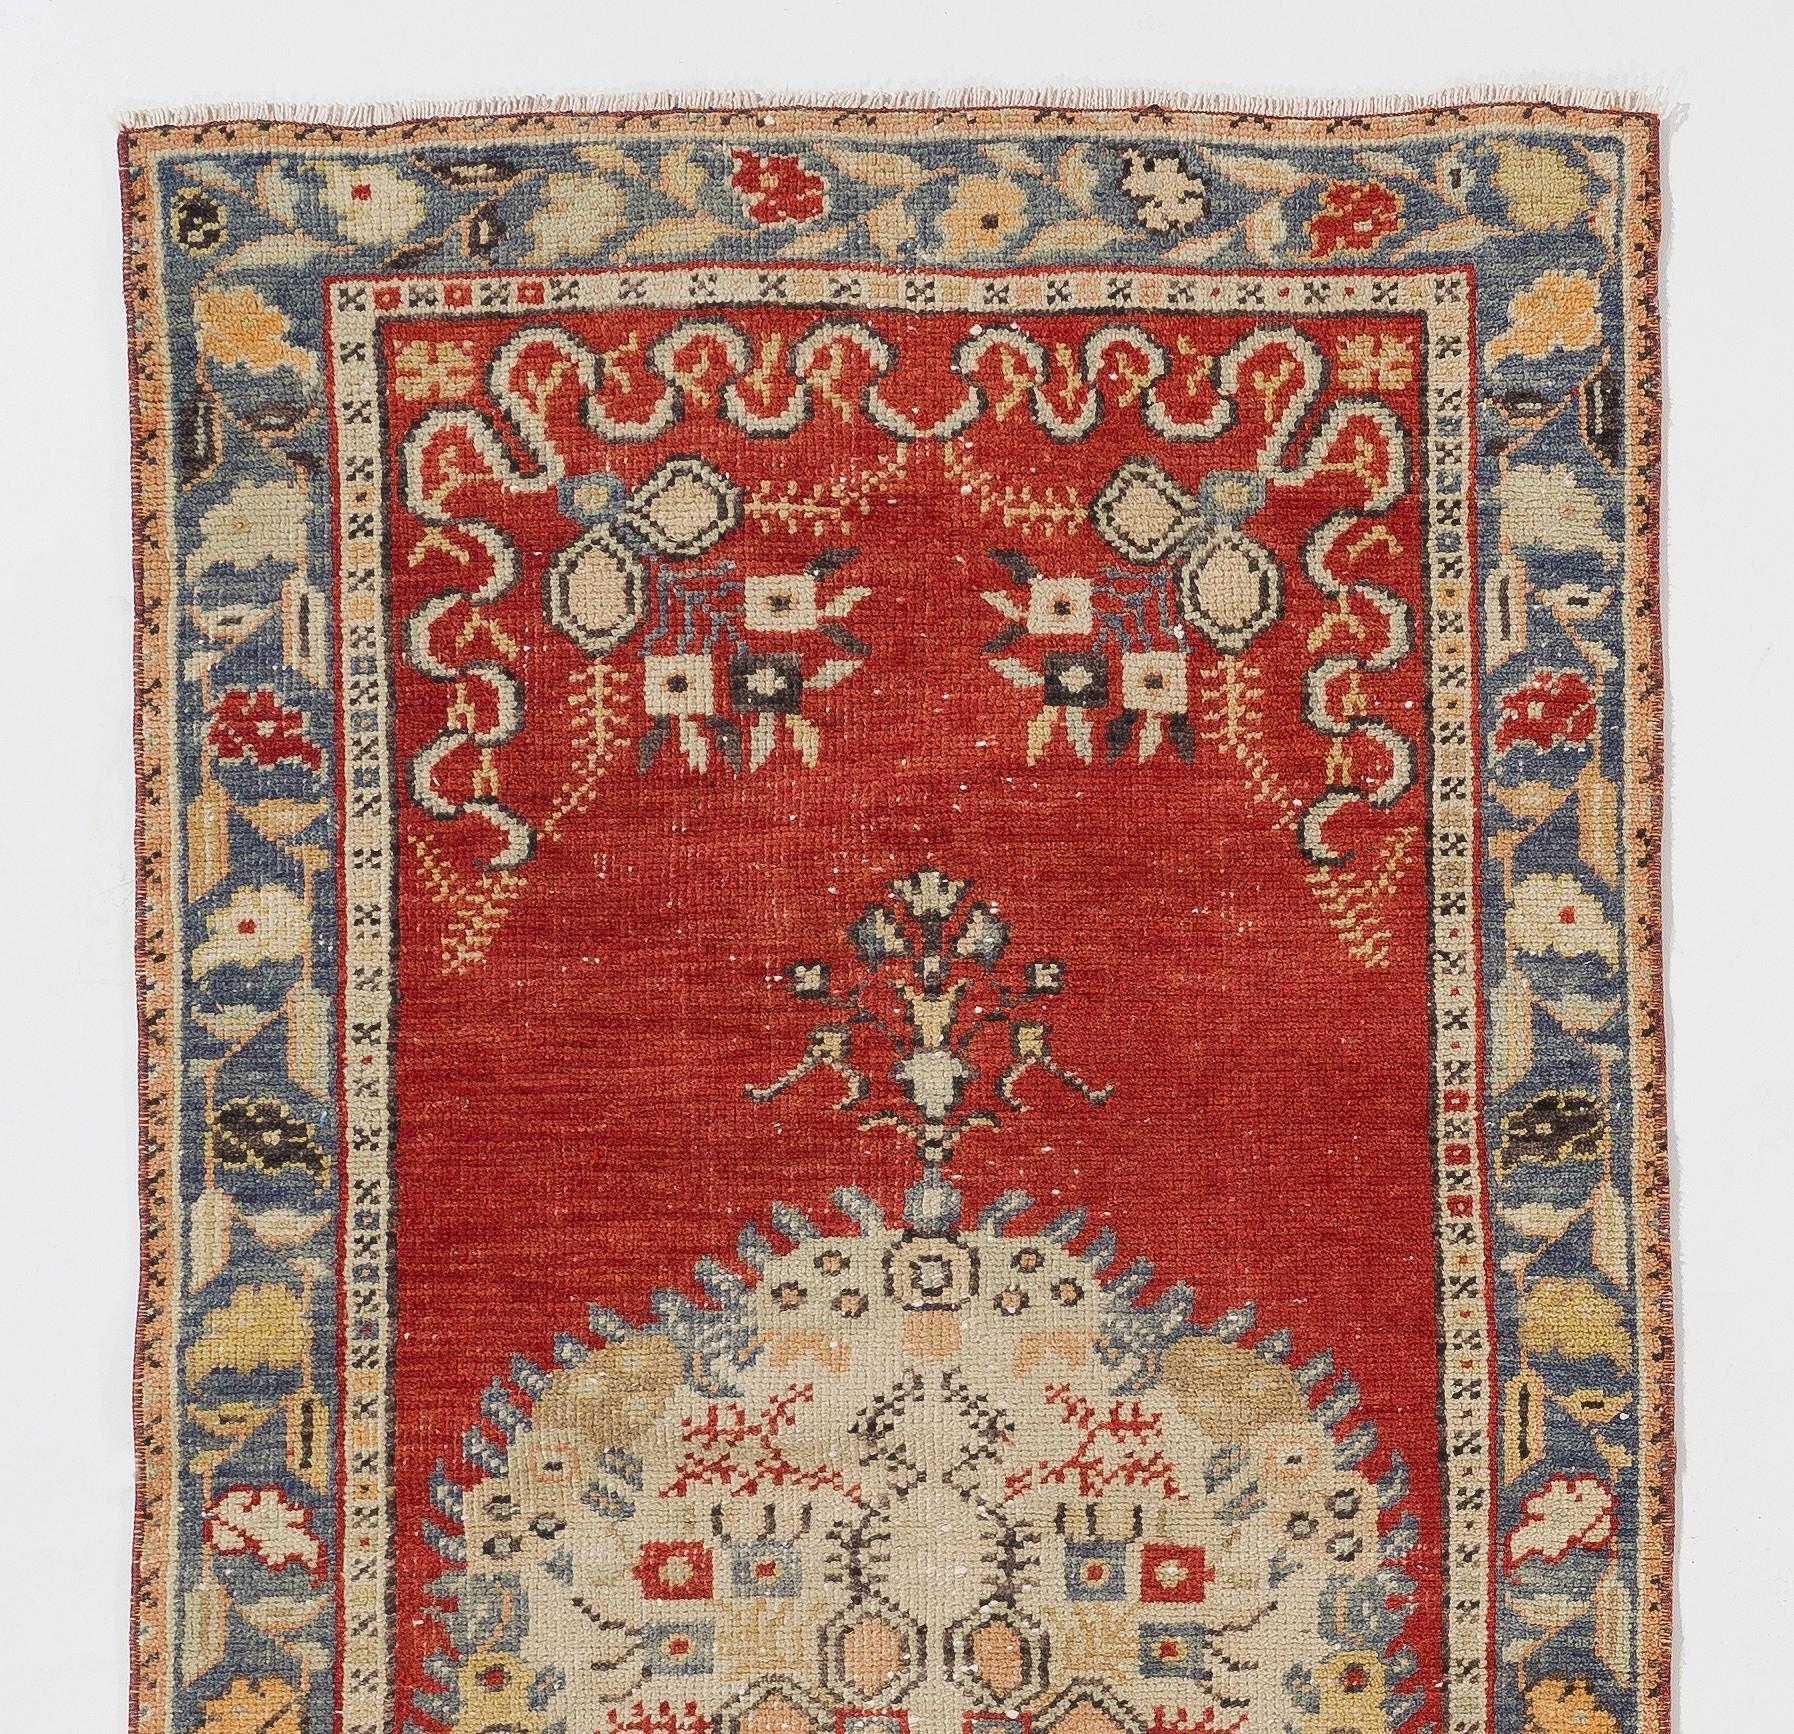 This vintage hand knotted accent rug from Central Anatolia has a large, elliptical medallion at its centre in ivory decorated with depictions of peacock feathers and stylized blossoms against a field in chilli red featuring bouquets of flowers on